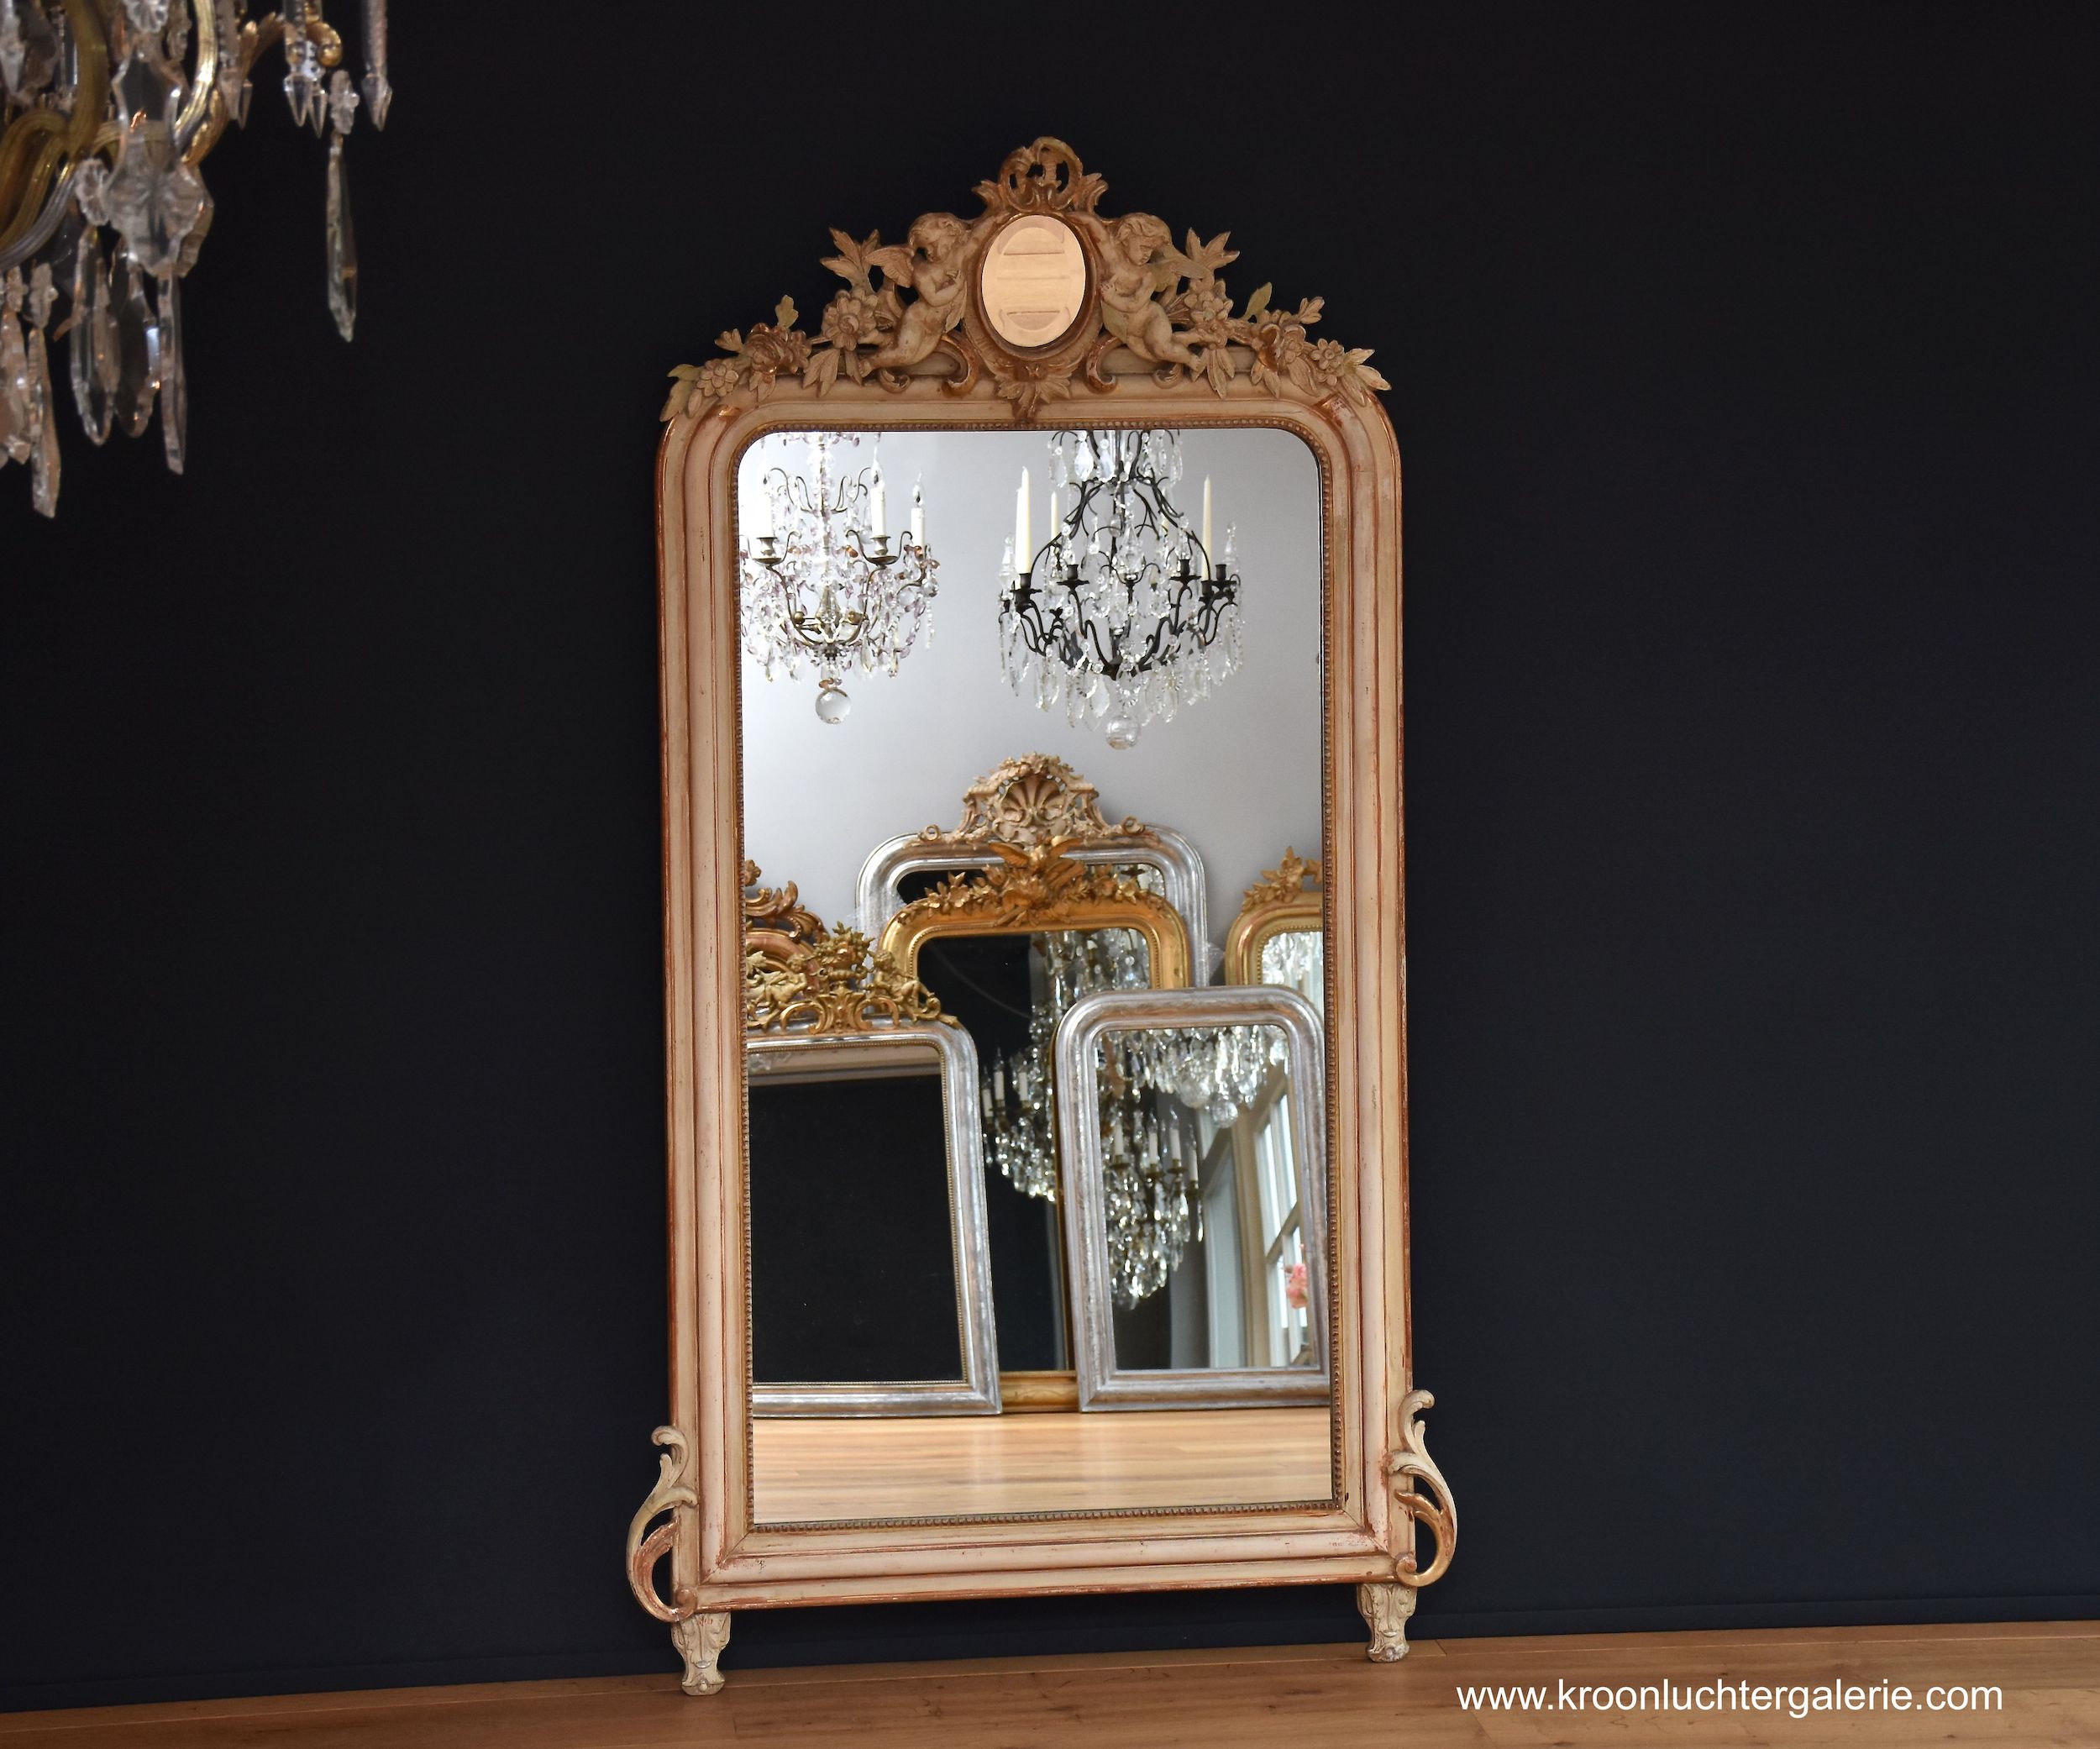 19th century French mirror with a crown